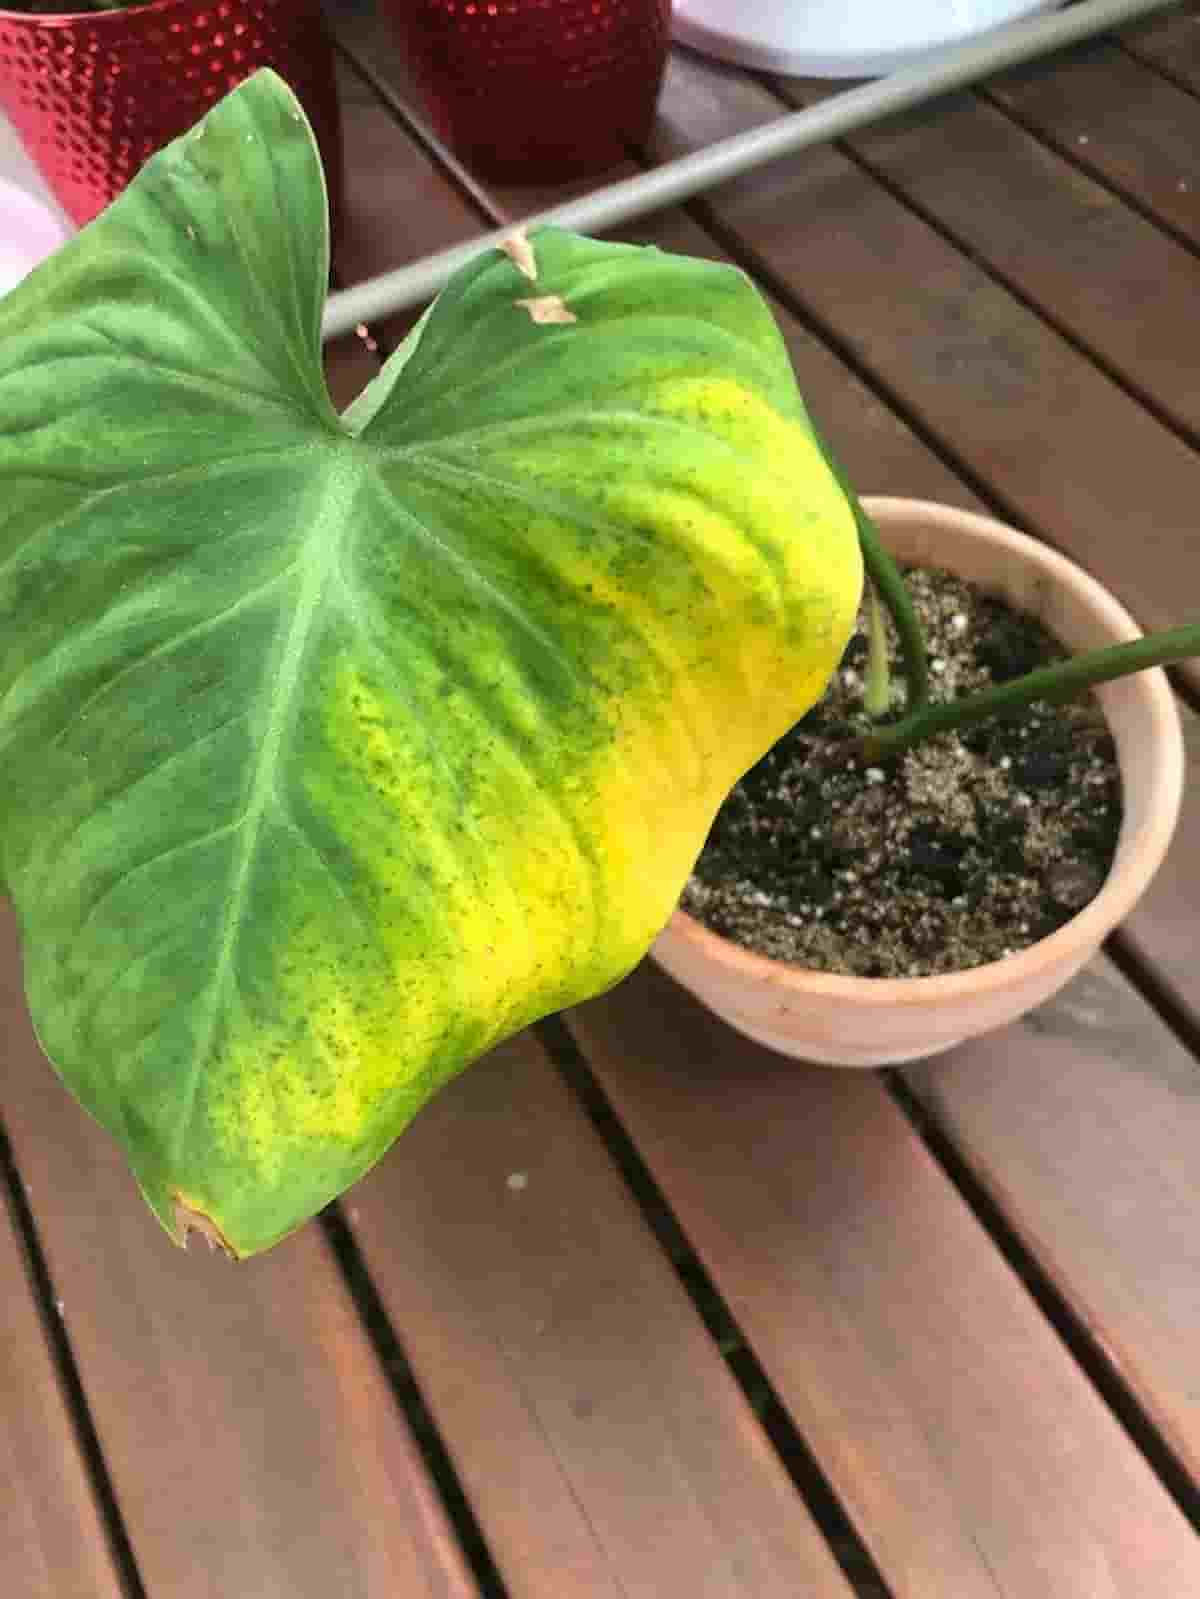 a philodendron that has yellow leaves on a brown pot